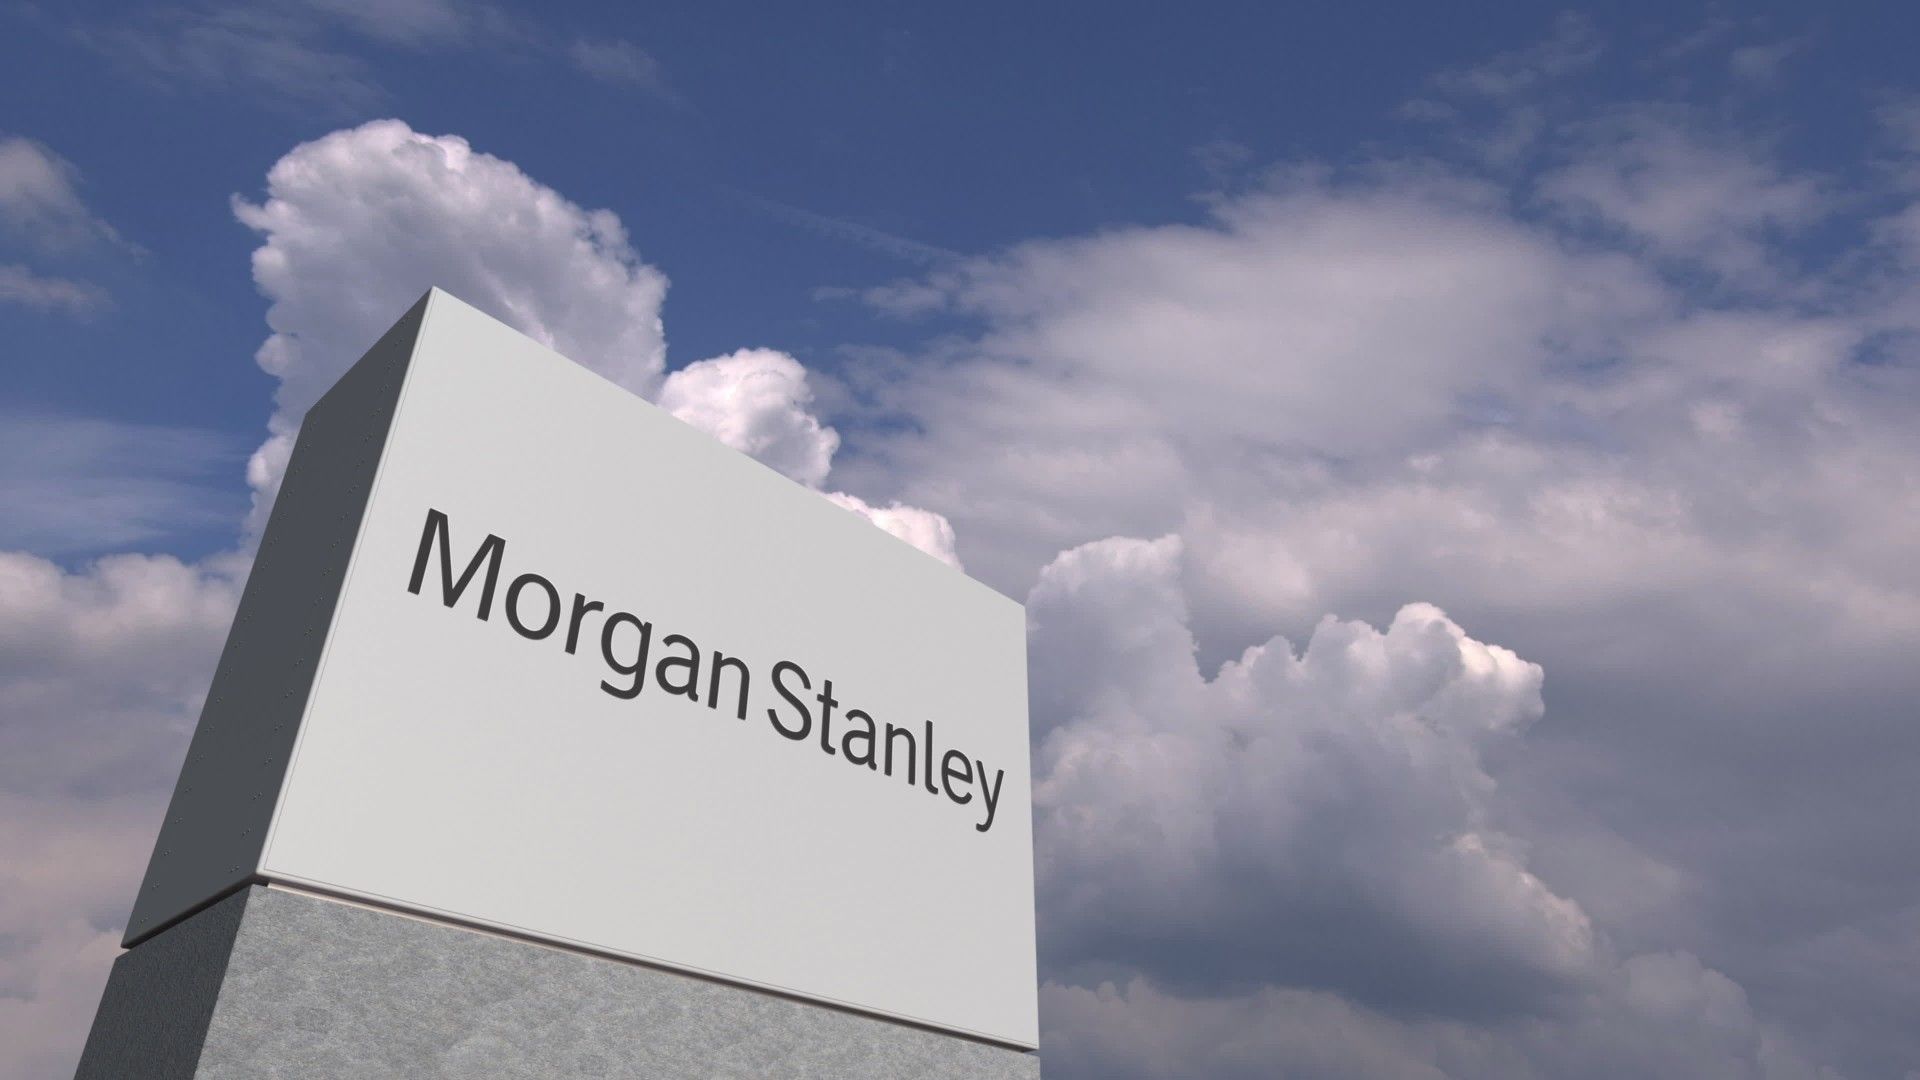 Rendering of Morgan Stanley on a sign with clouds in the sky